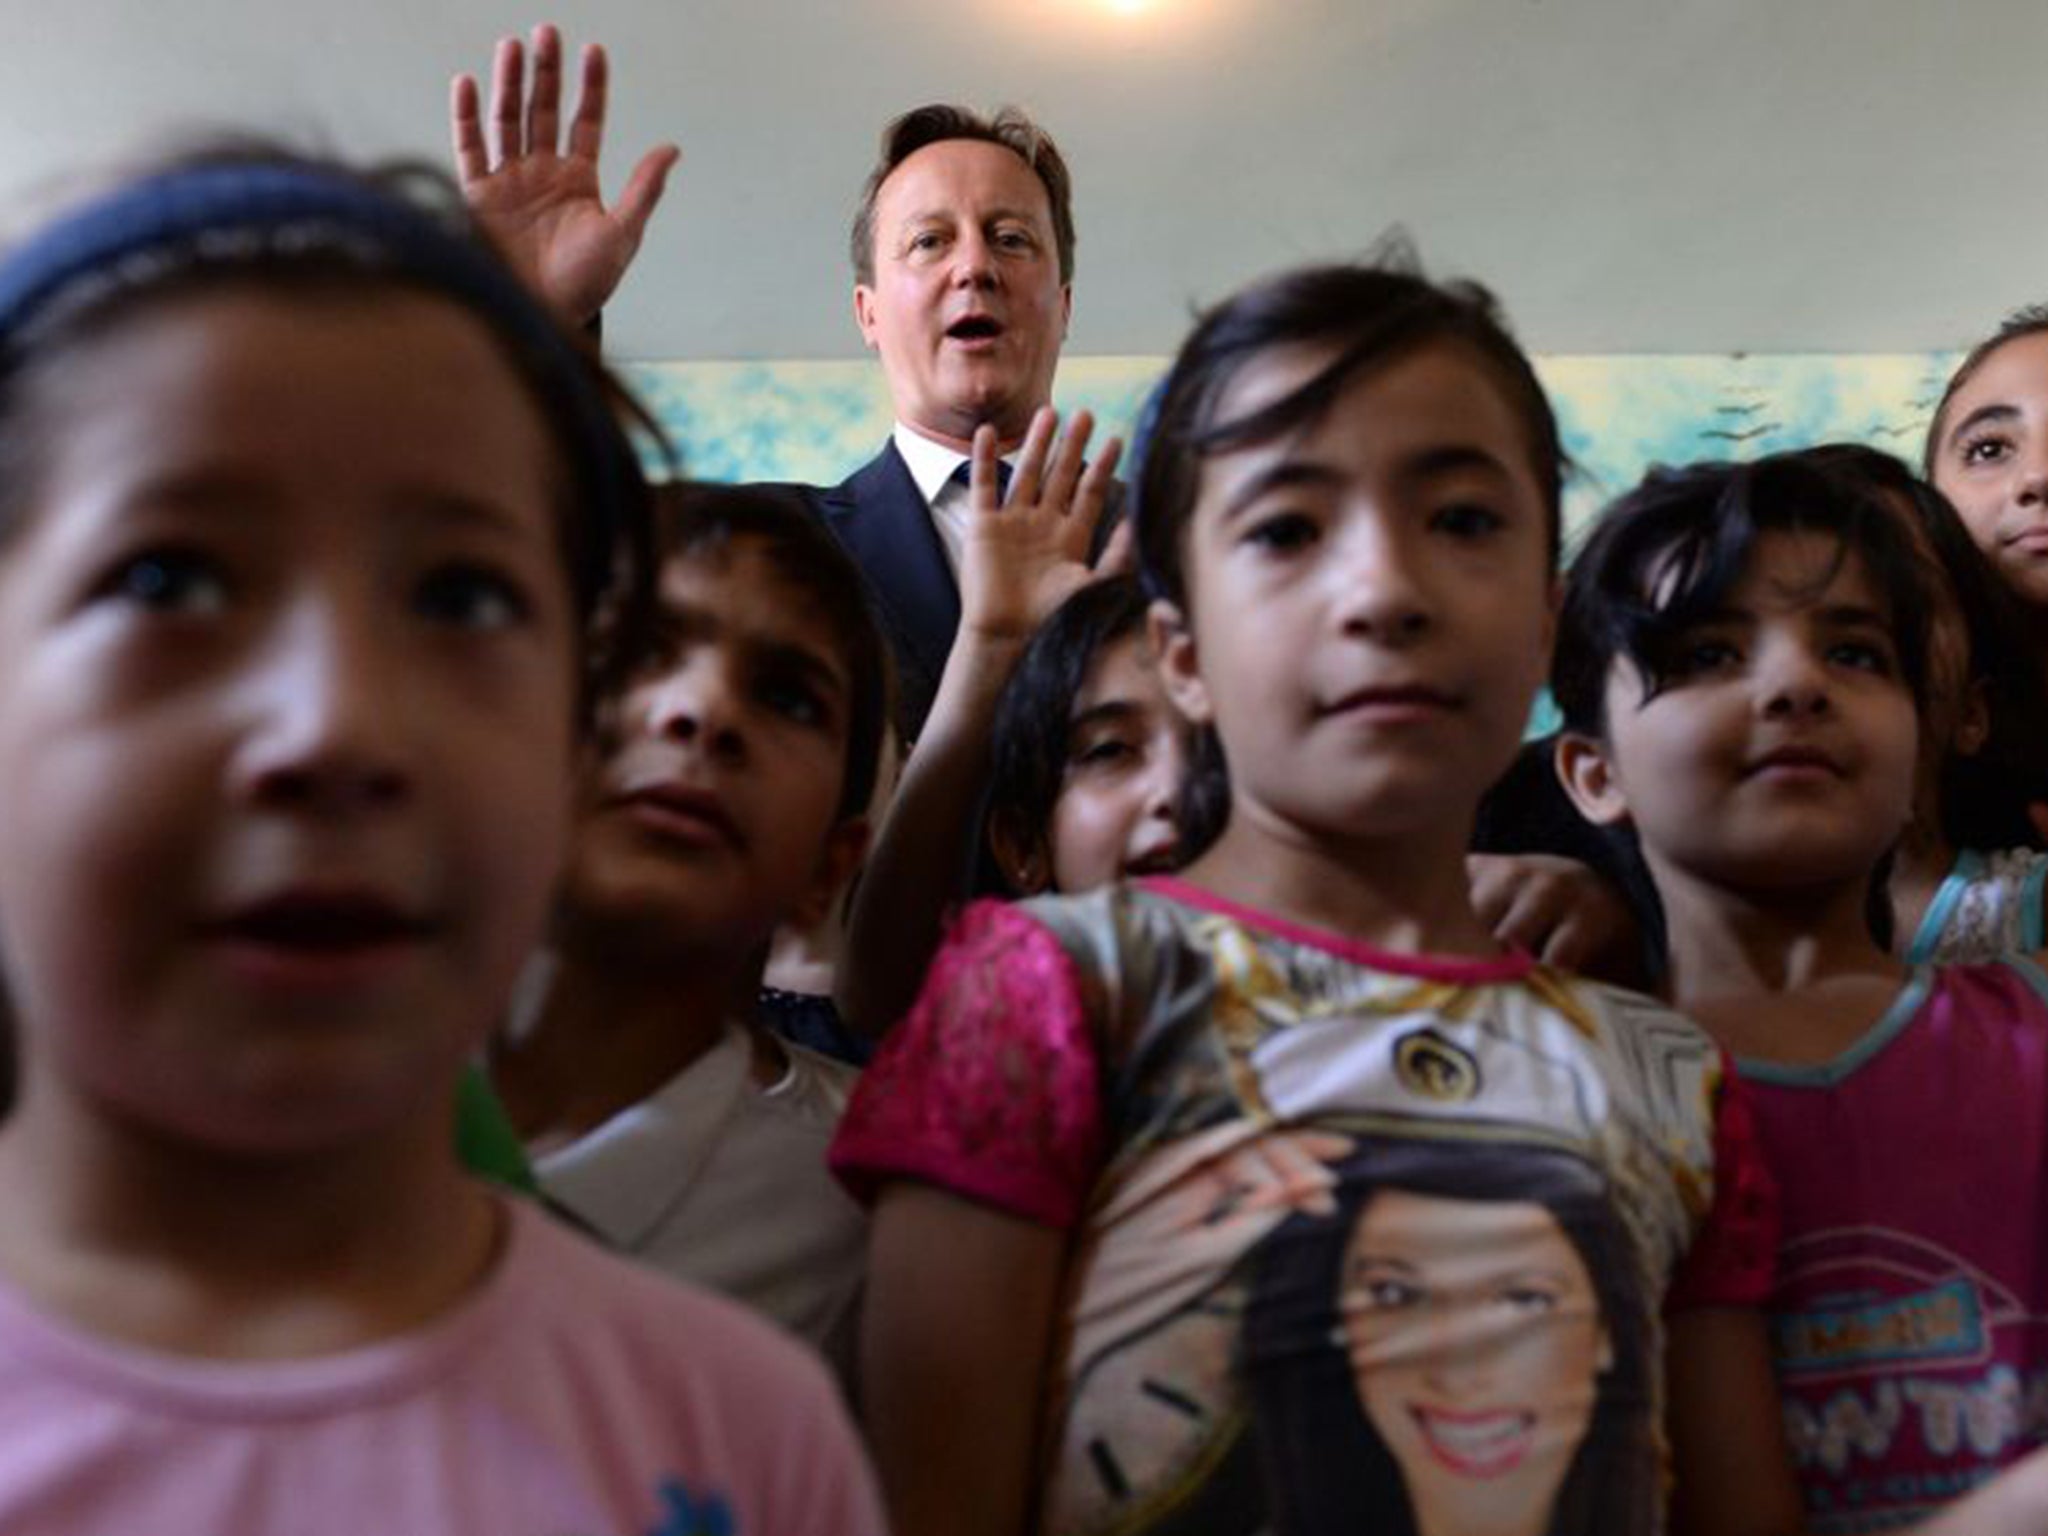 Prime Minister David Cameron visited the Sed El Boucrieh School in Beirut, as part of a whistle-stop tour of Lebanon